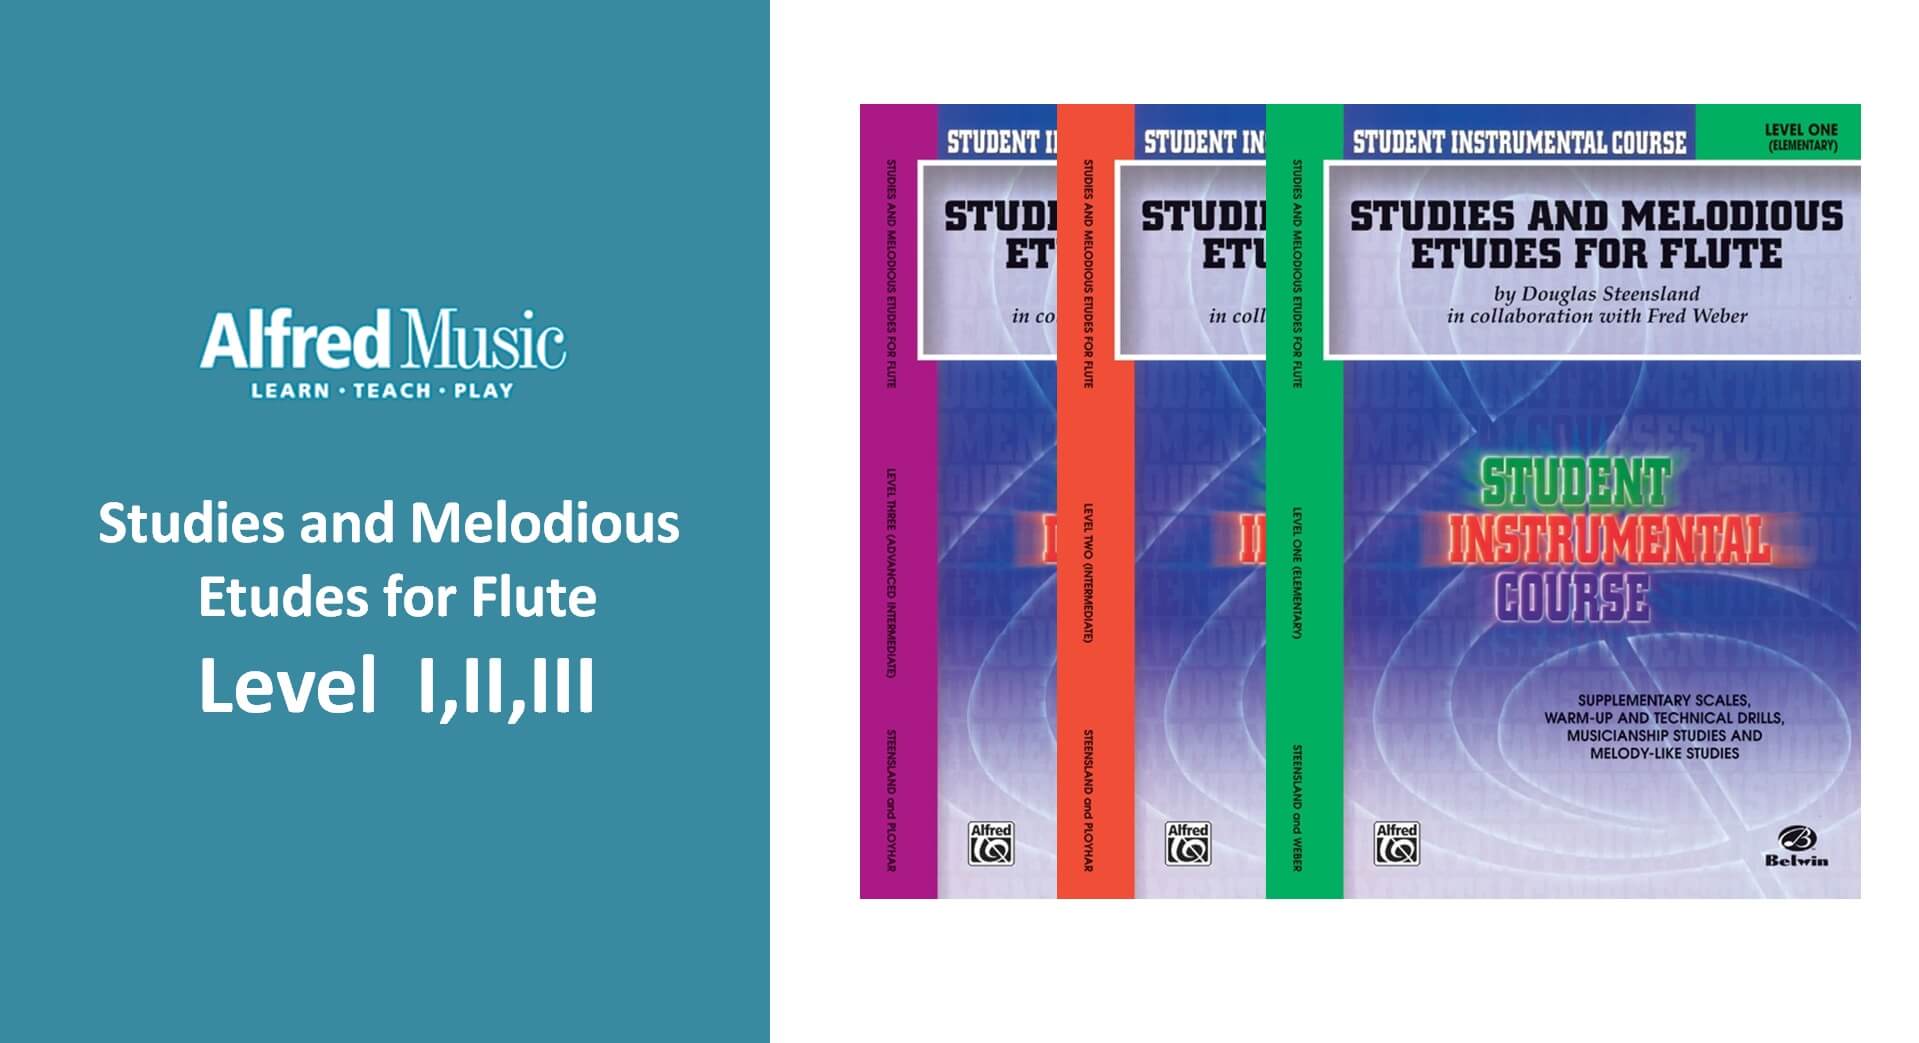 Student Instrumental Course: Studies and Melodious Etudes for Flute